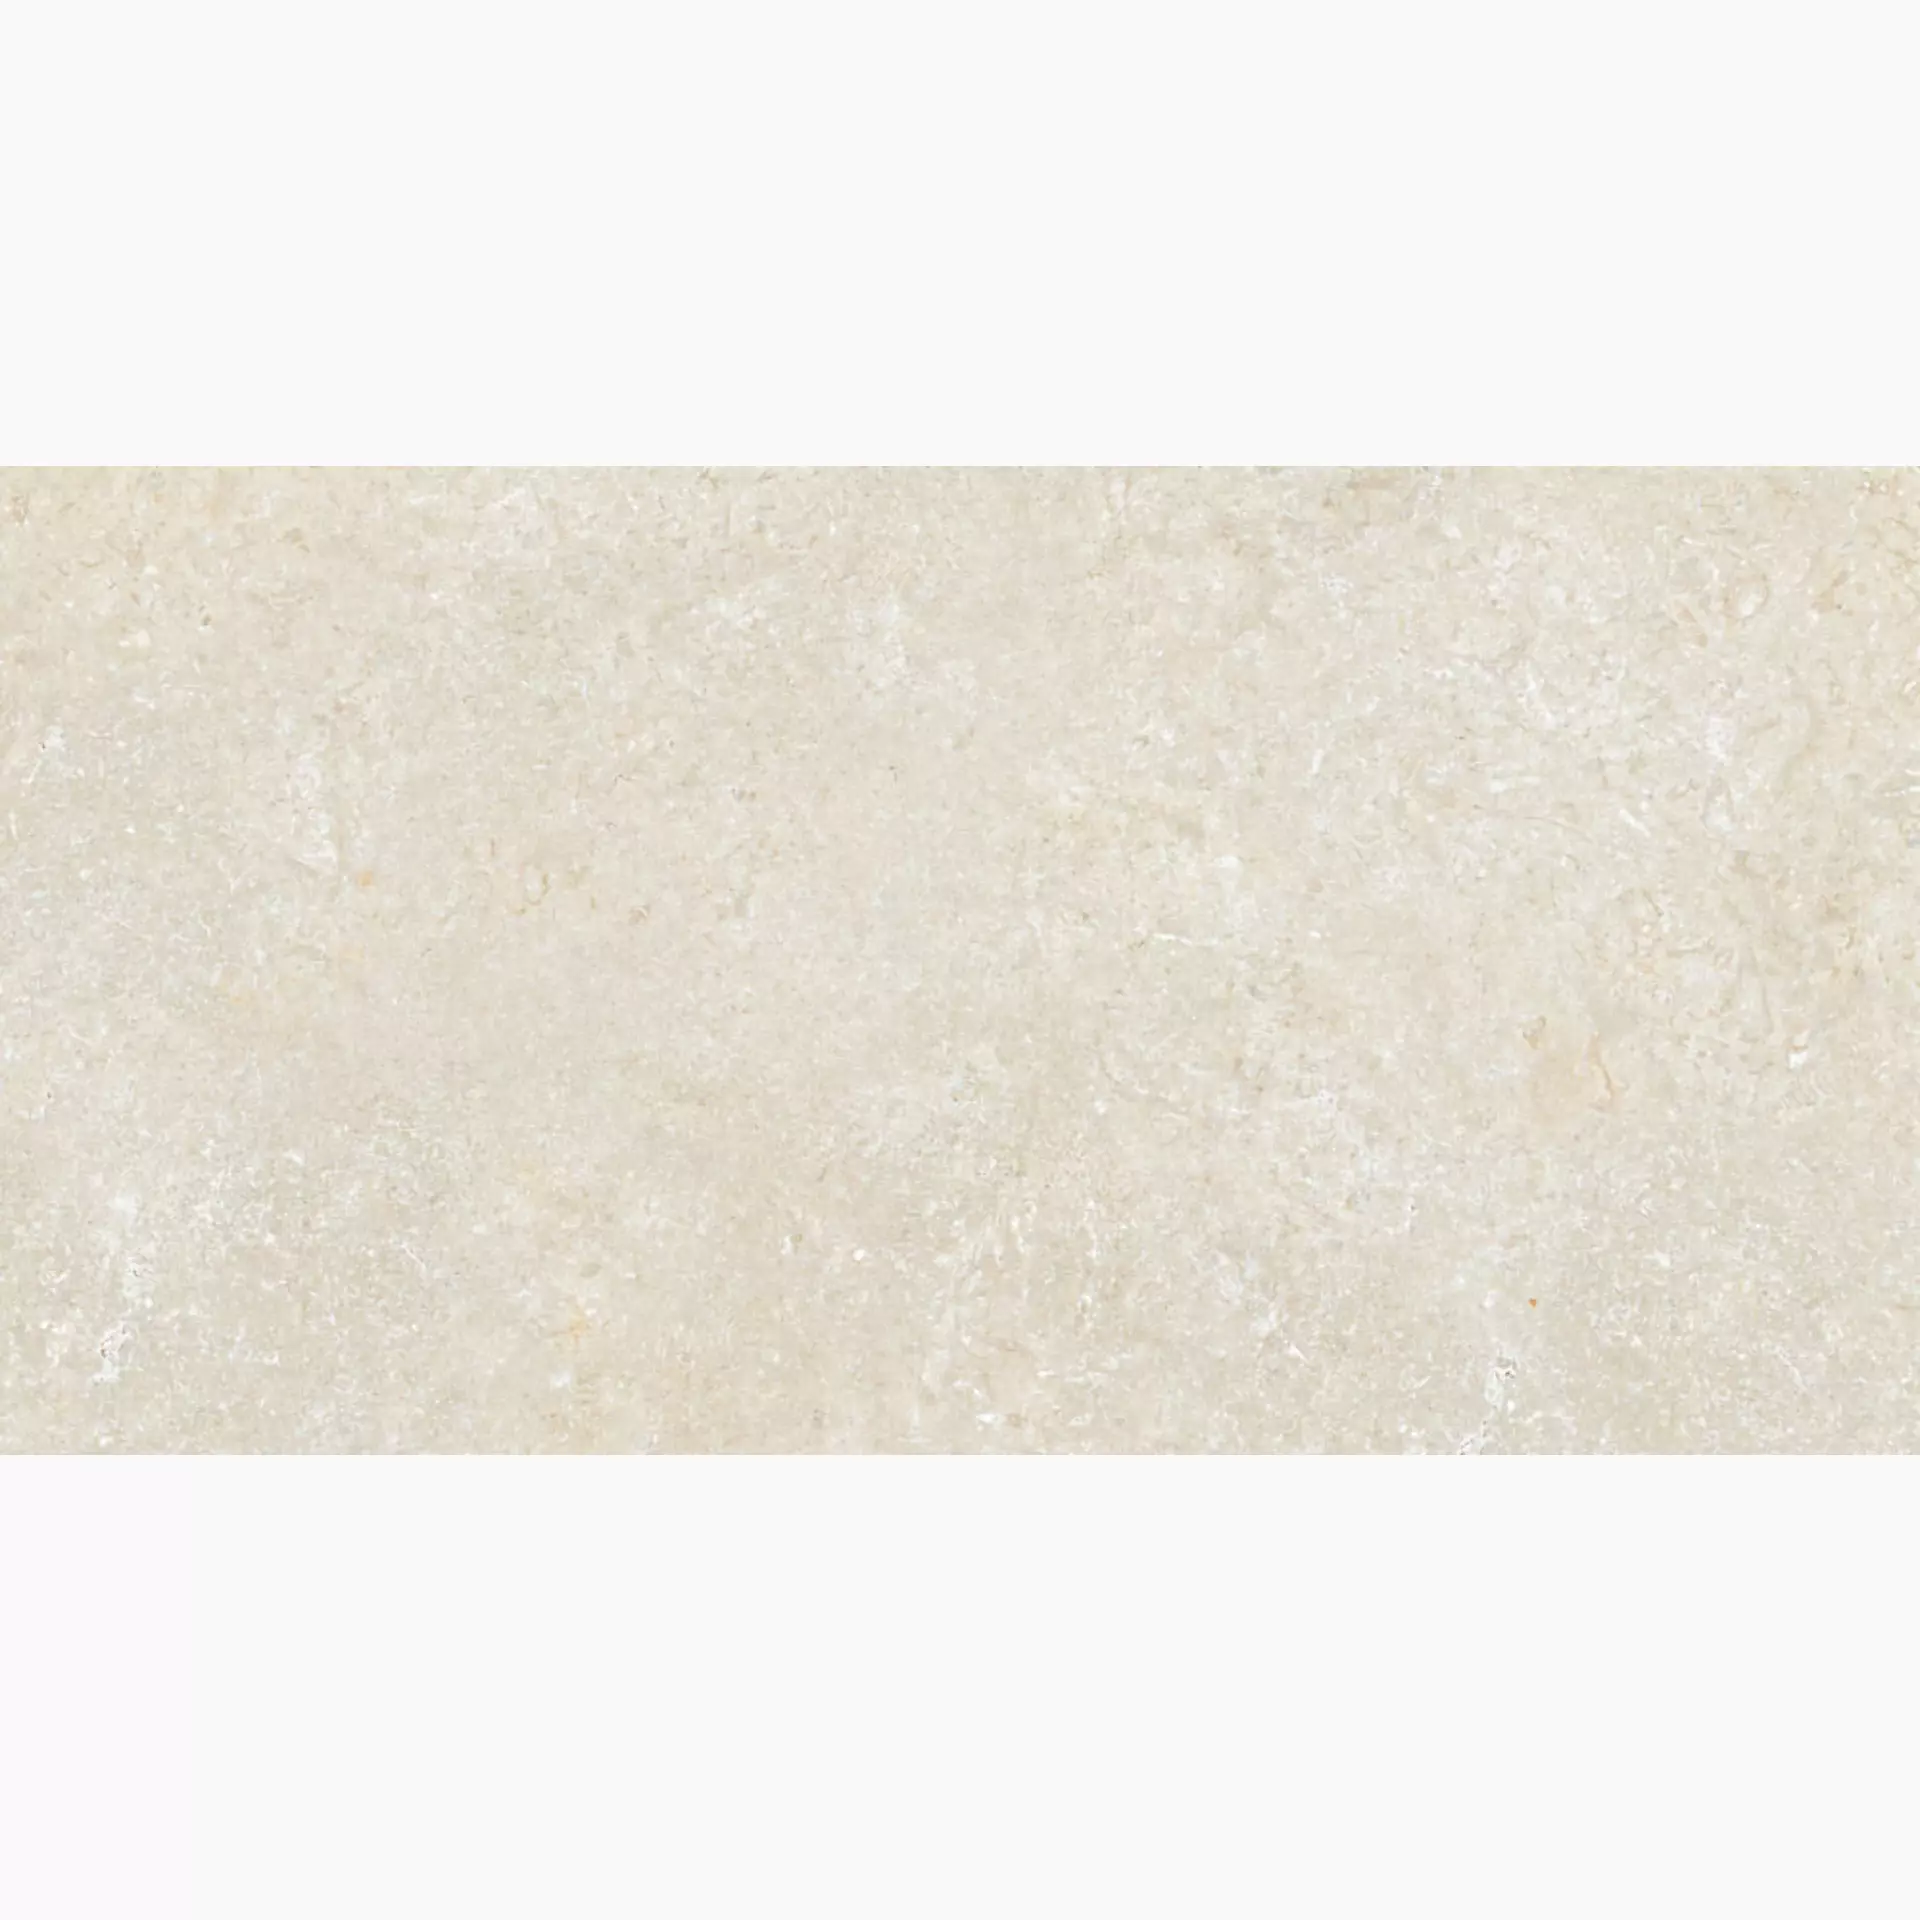 Cottodeste Secret Stone Mystery White Honed Protect EG-SSX0 30x60cm rectified 14mm